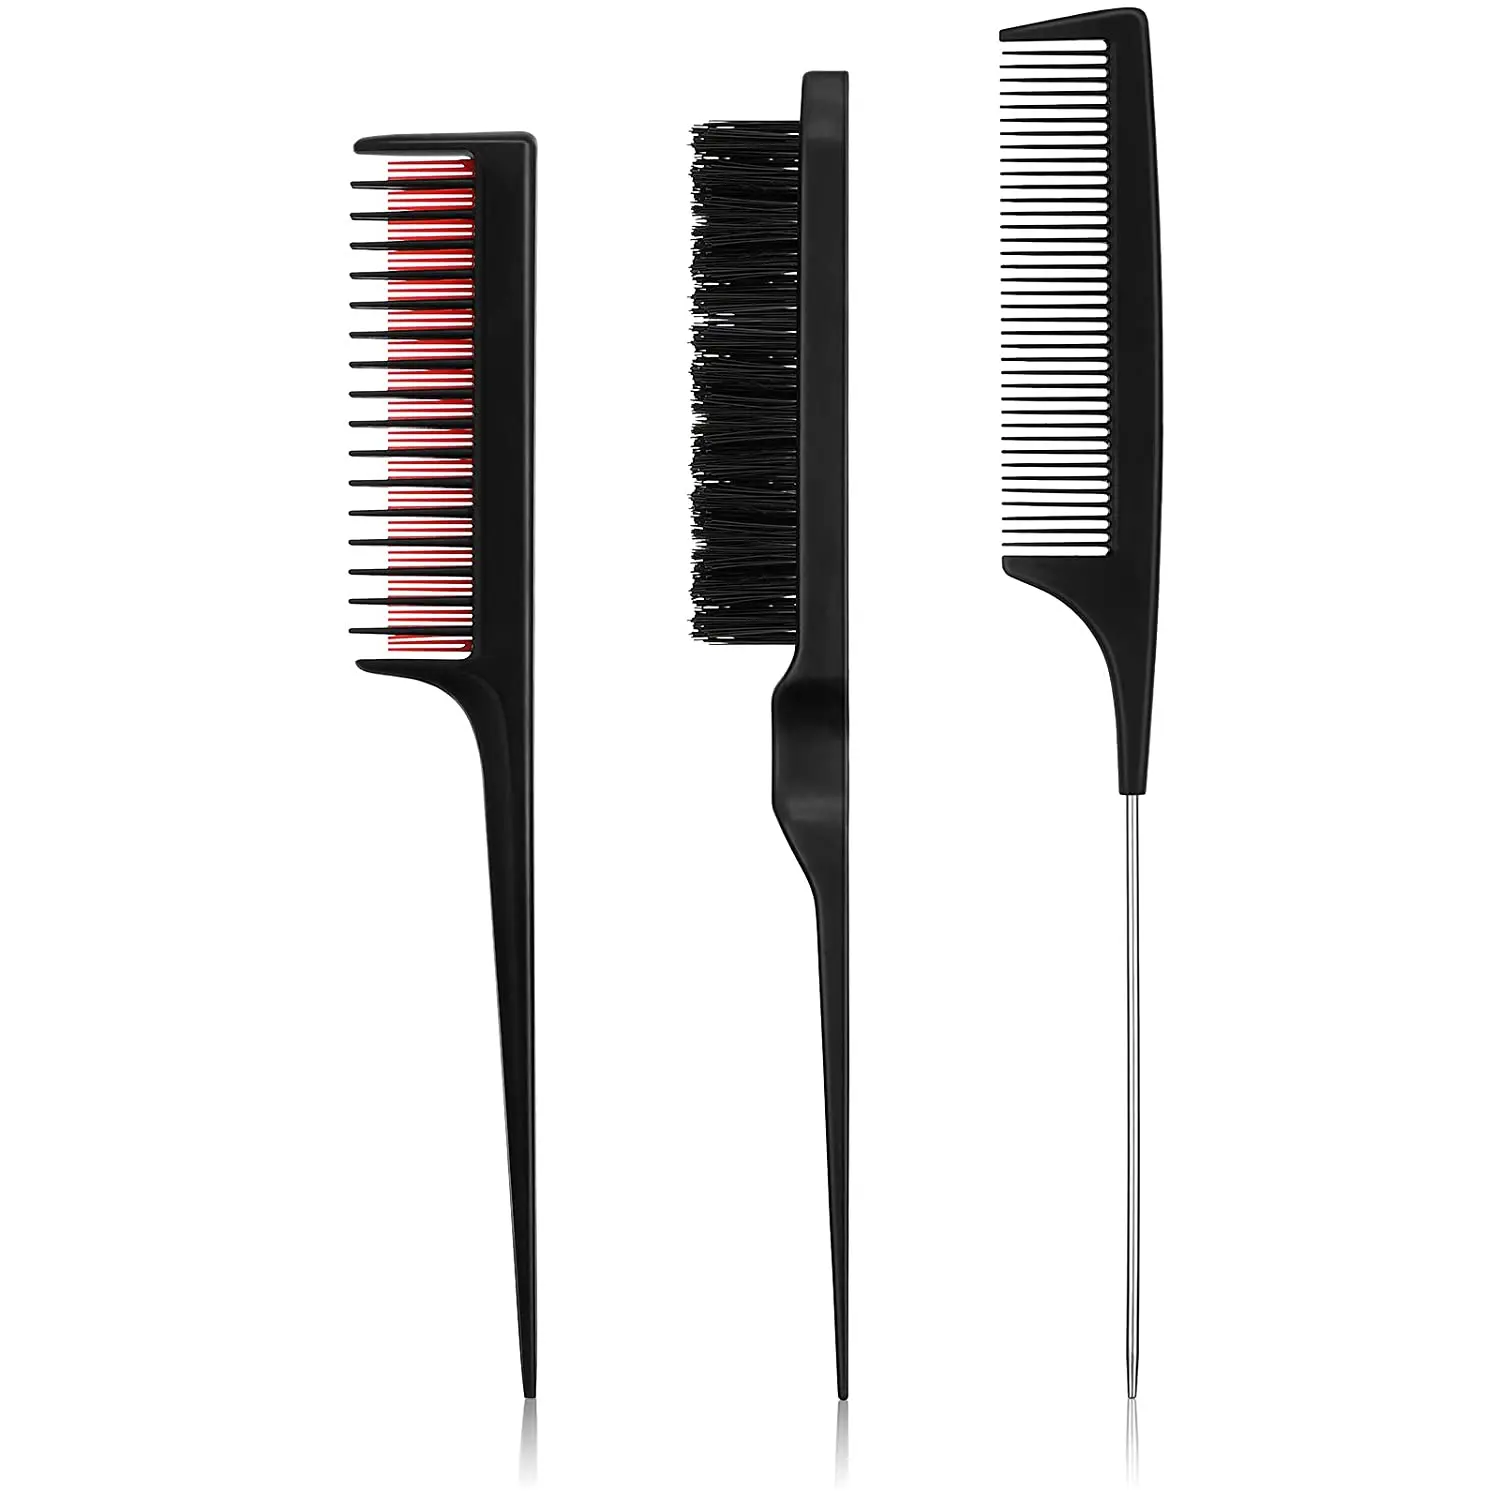 Double Sided Comb Styling For Hair Tool Personalized Combs Private Label  And Tools Cutting White Sclap Plastic Set - Buy Professional Teasing Comb,Double  Sided Comb Styling,Comb For Hair Styling Tool Product on